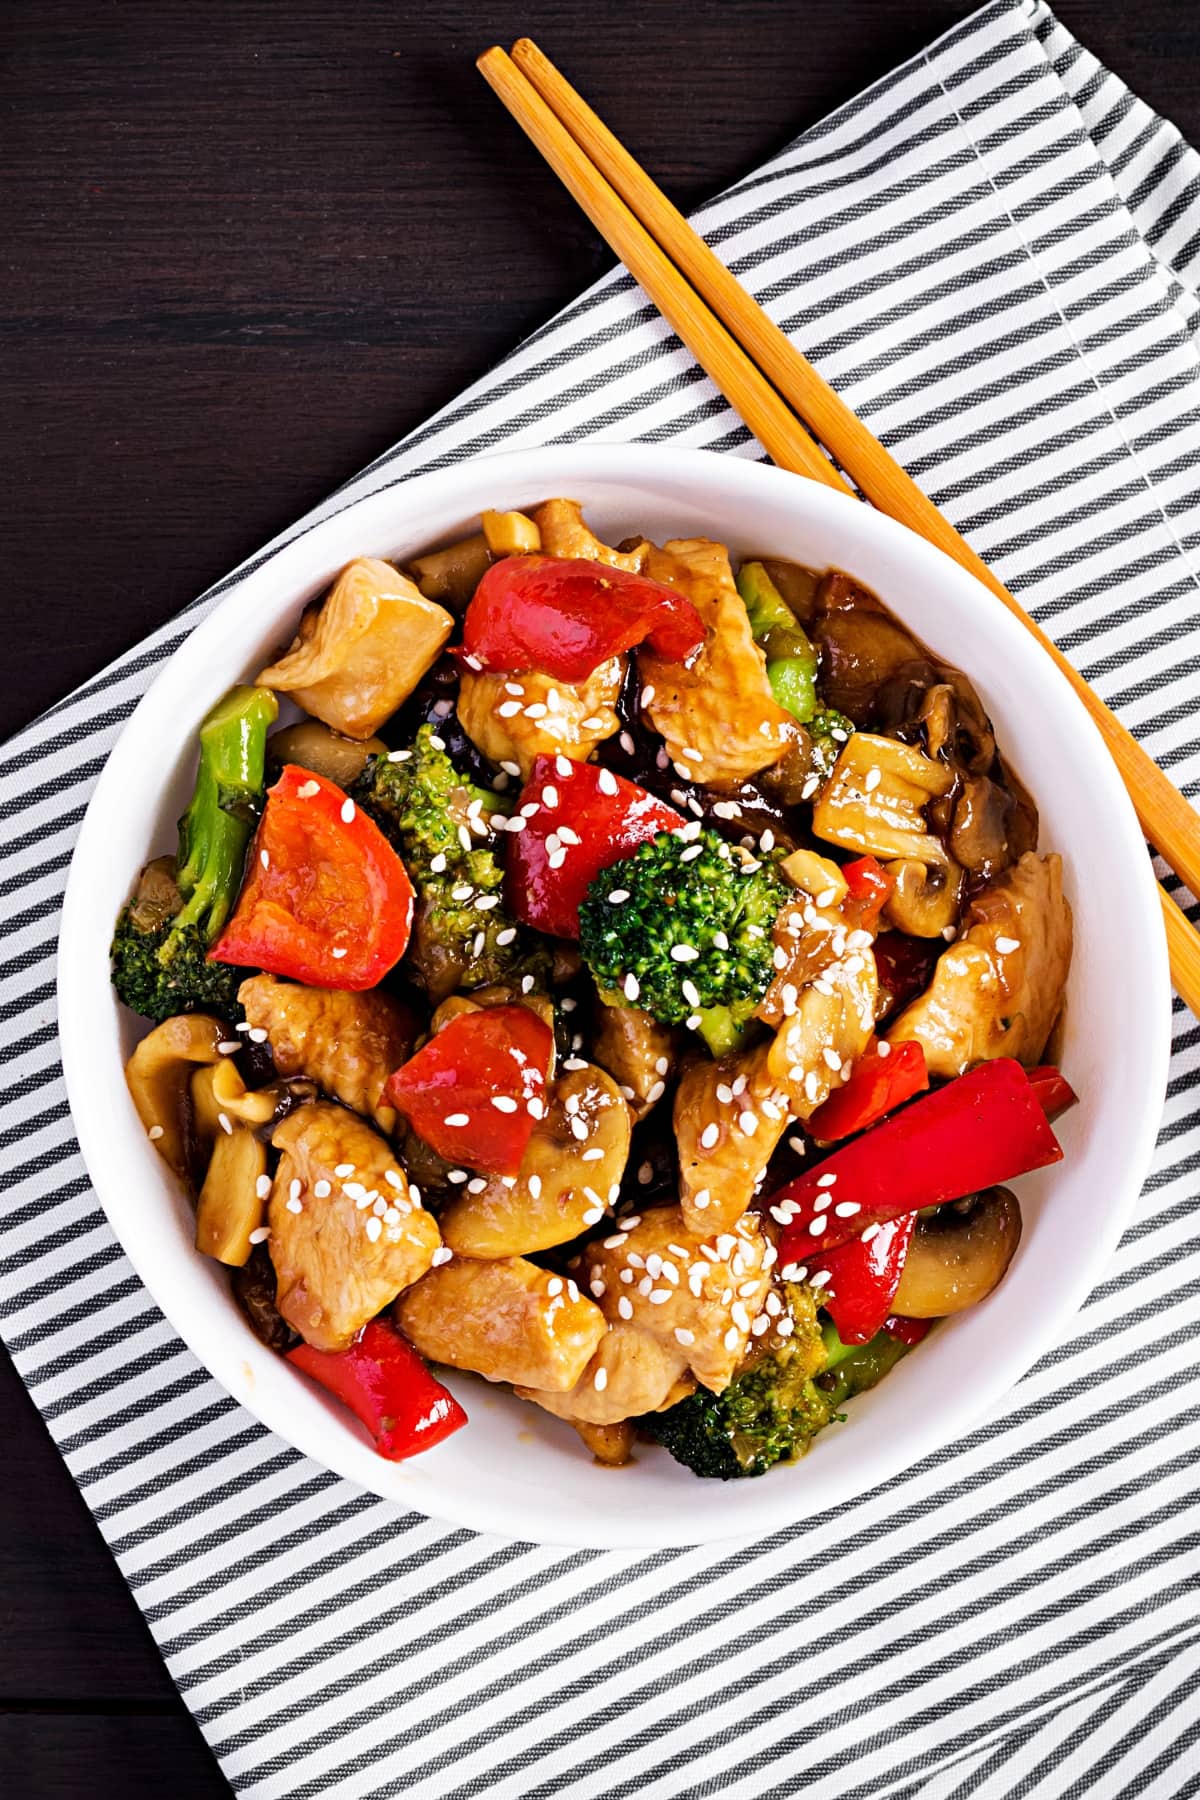 Stir-Fry Chicken with Broccoli, Belle Peppers and Sesame Seeds